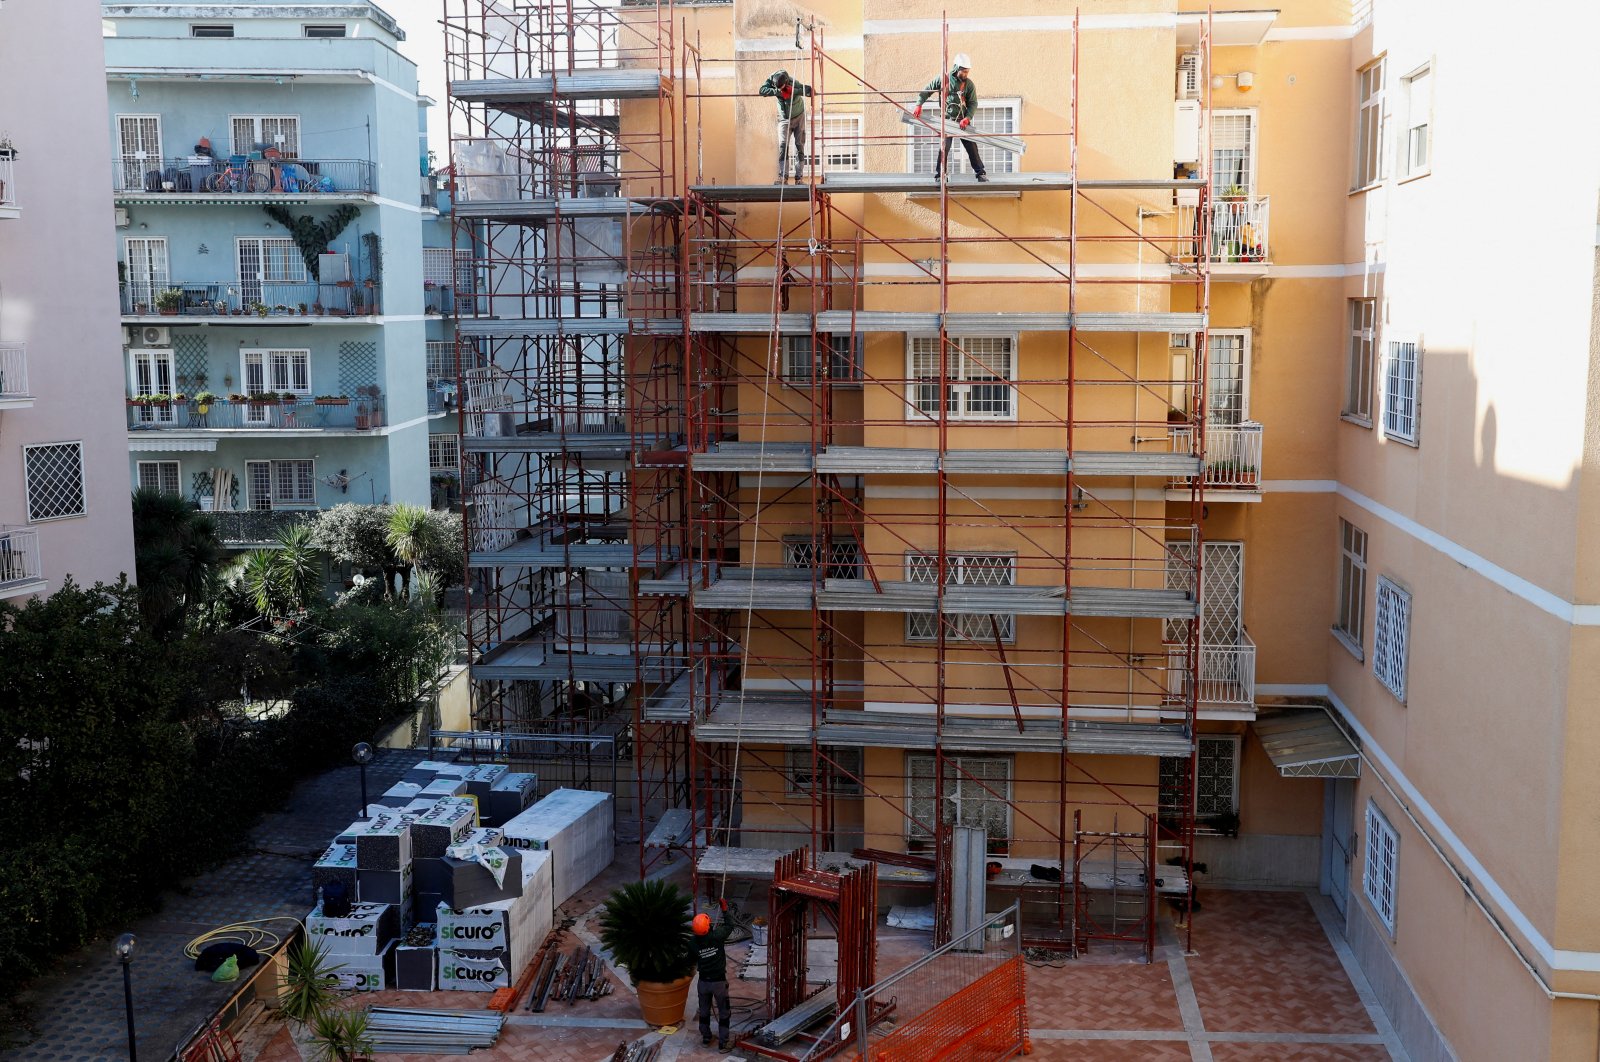 Builders work at the construction site of an energy-saving building, making apartments more energy-efficient under the government&#039;s &quot;superbonus&quot; incentives, in Rome, Italy, Feb. 1, 2023. (Reuters Photo)